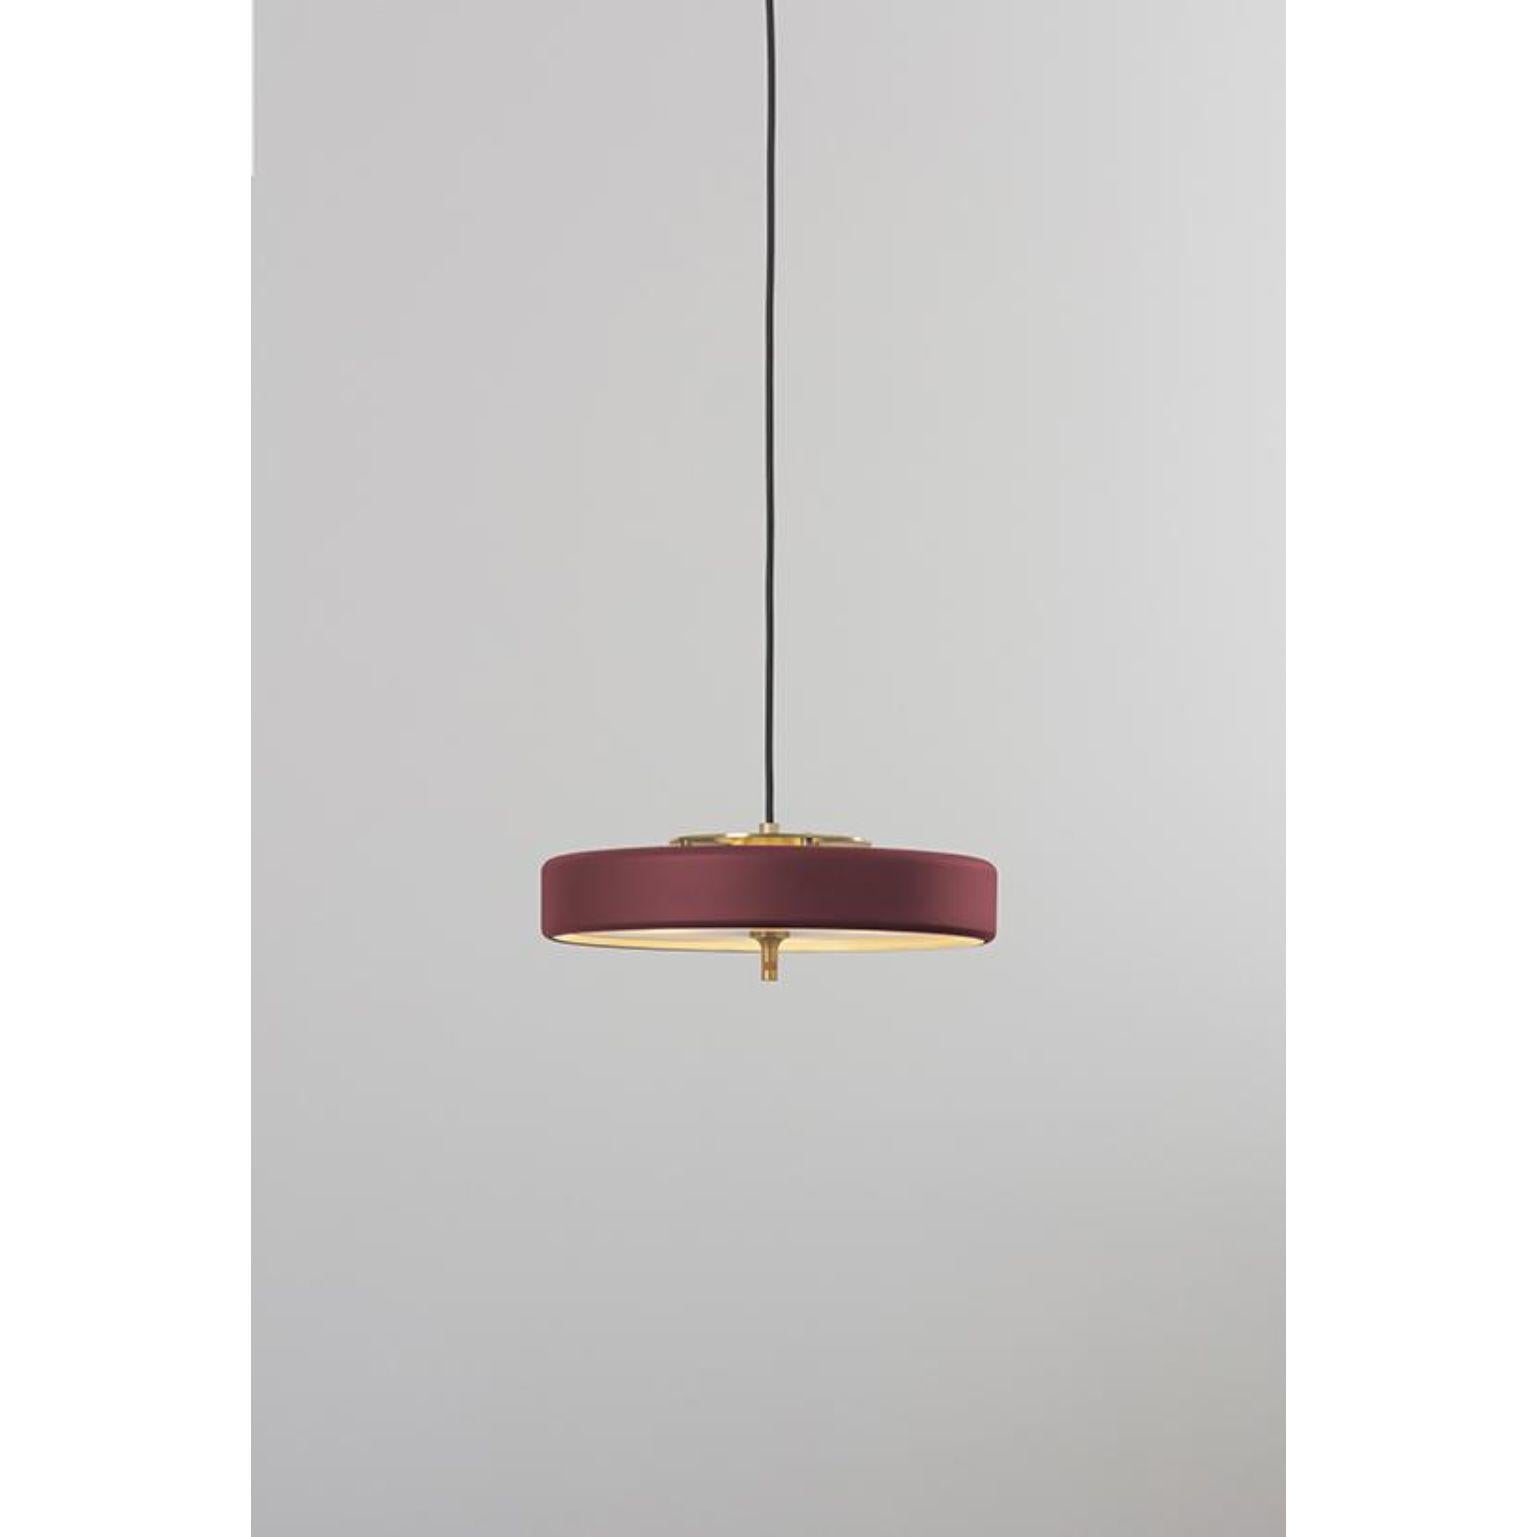 Revolve pendant light - Polished brass - Oxblood by Bert Frank
Dimensions: 60-200 x 35 x 11 cm
Materials: Brass, steel

Also available in brushed brass

When Adam Yeats and Robbie Llewellyn founded Bert Frank in 2013 it was a meeting of minds and